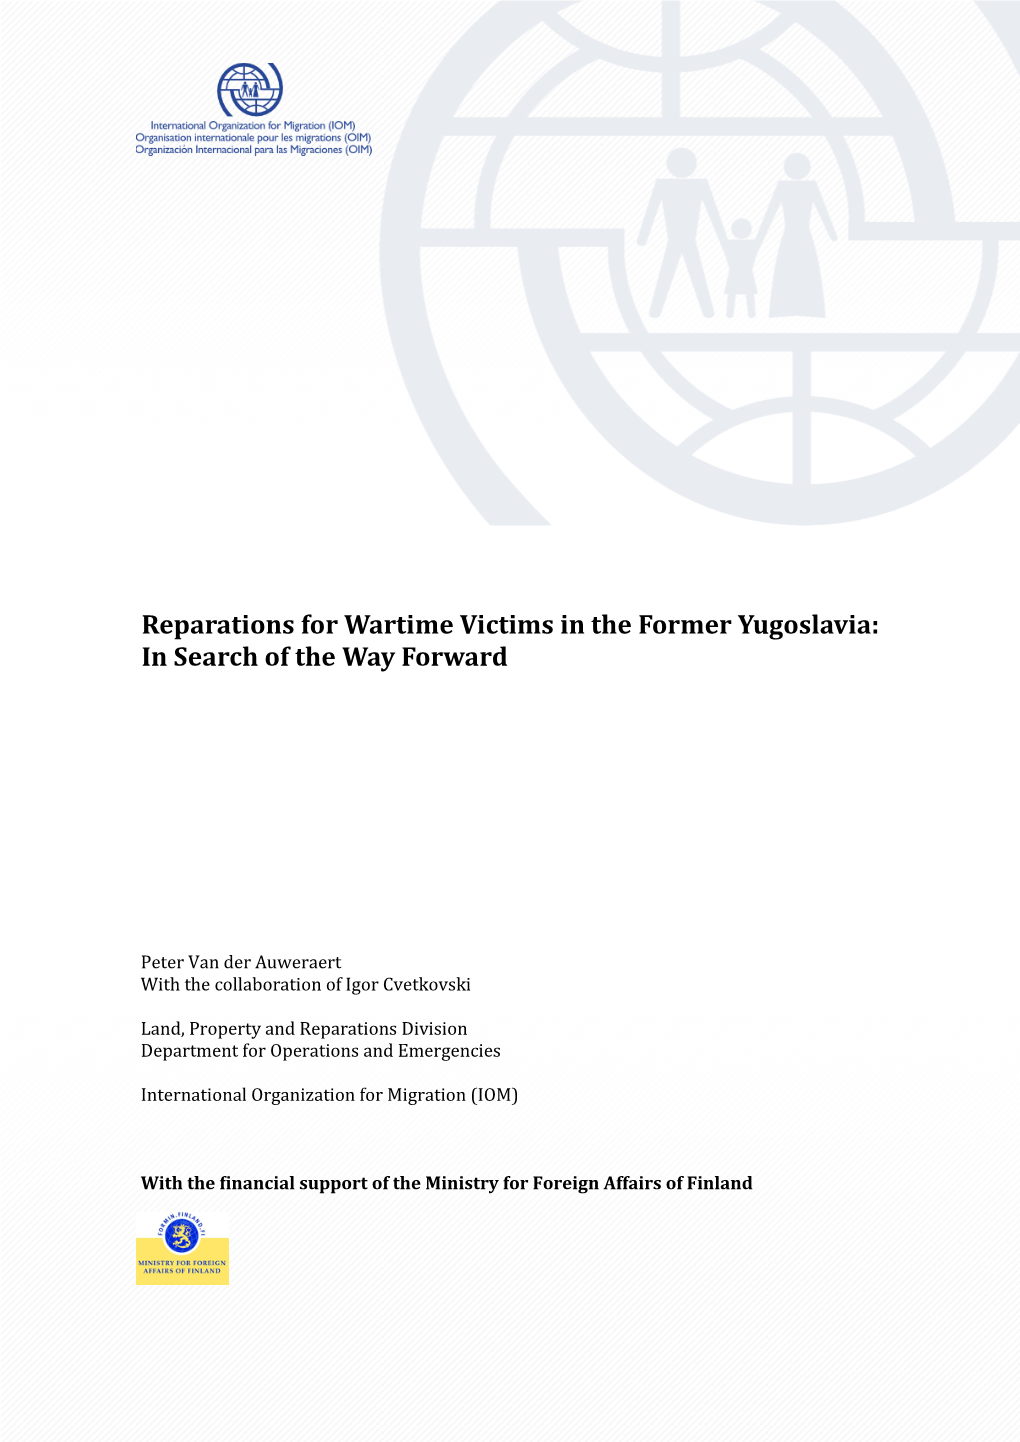 Reparations for Wartime Victimes in the Former Yugoslavia: in Search Of